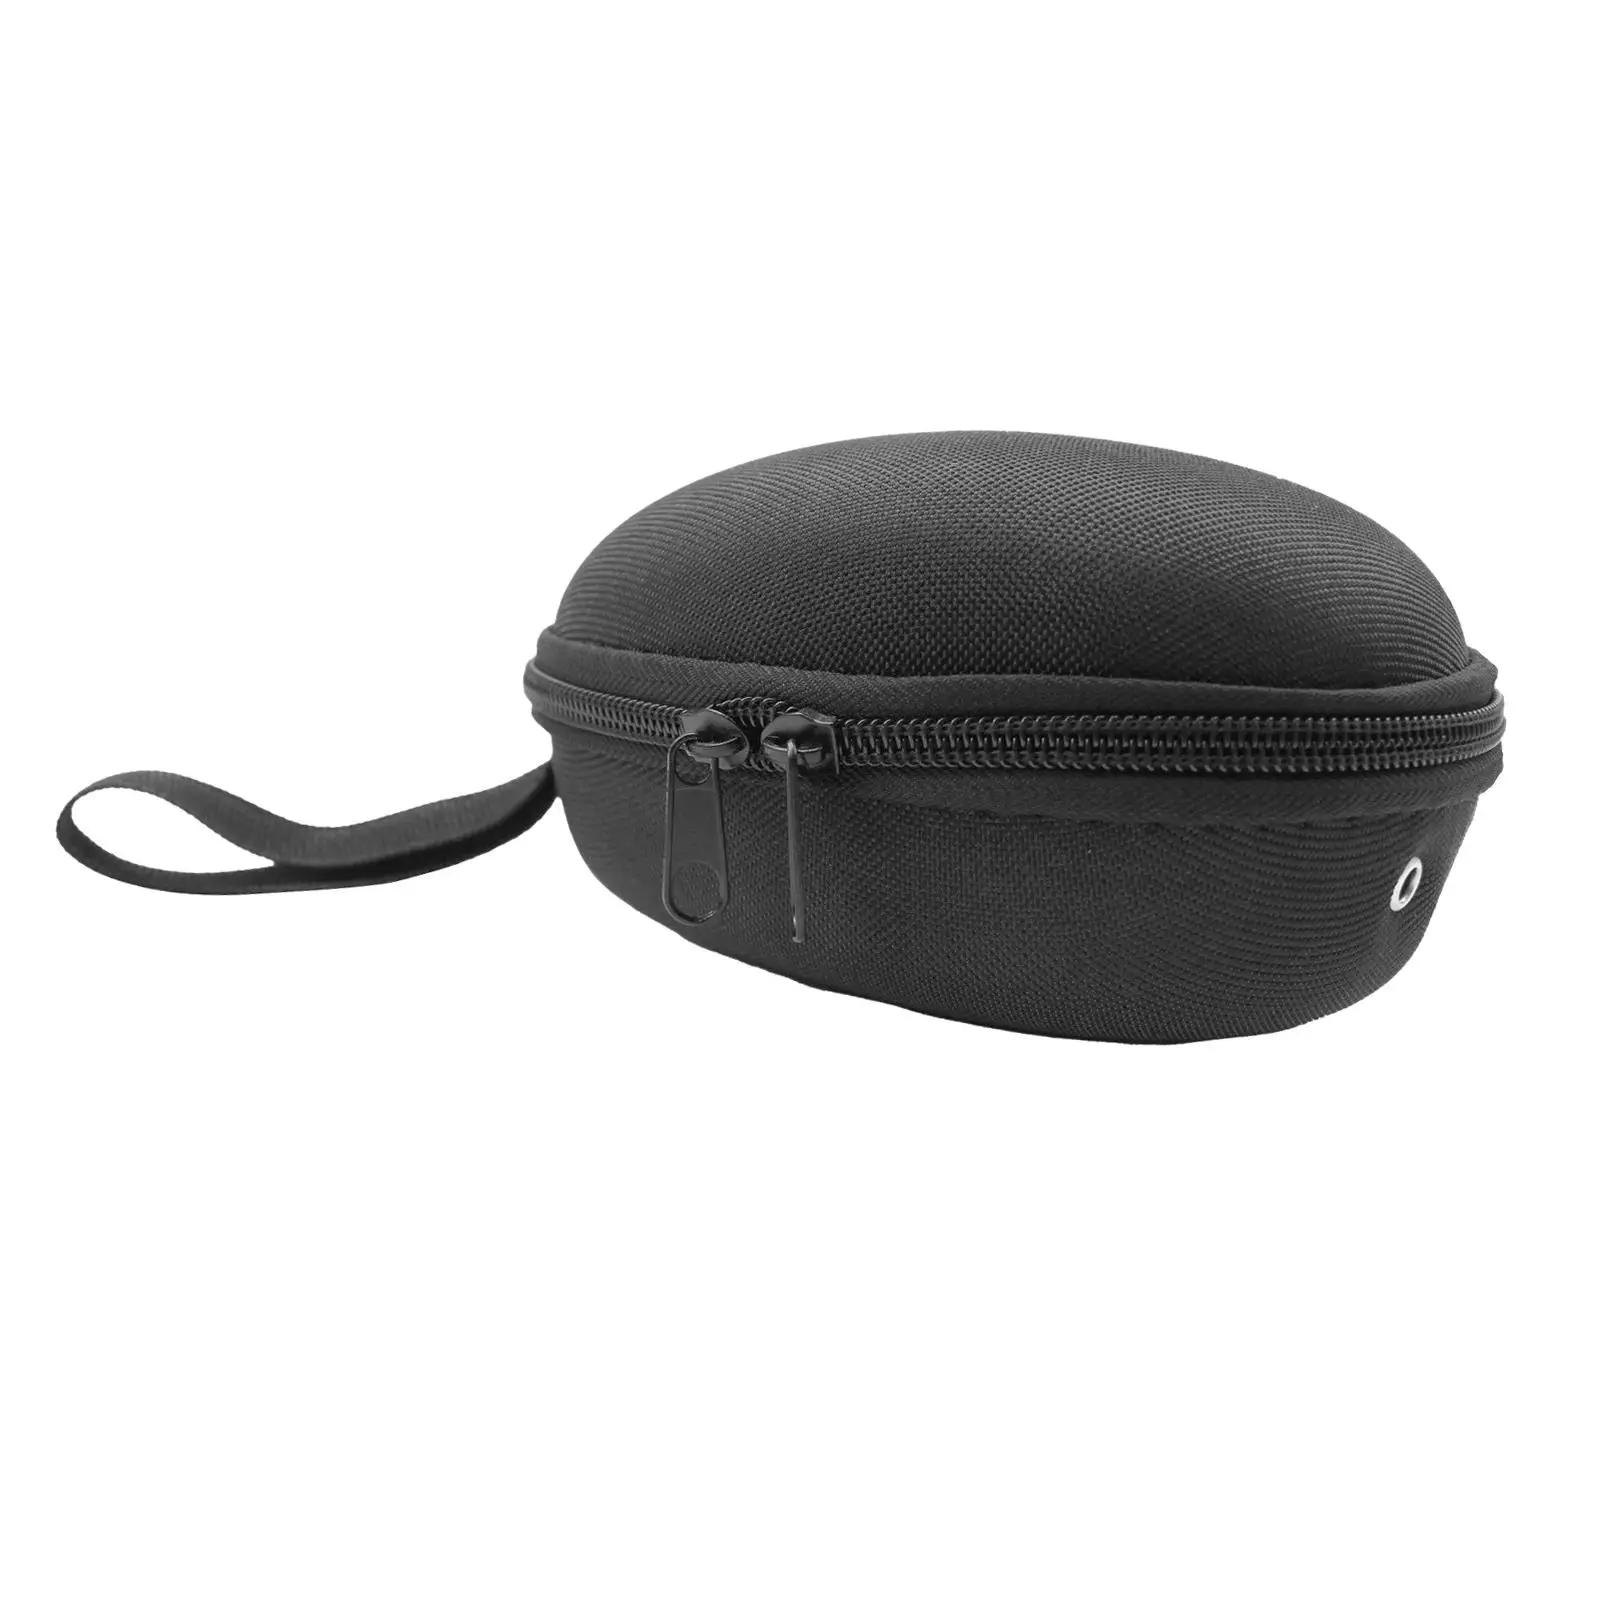 Fishing Reel Bag with Handle Strap Practical Black for Fishing Accessories